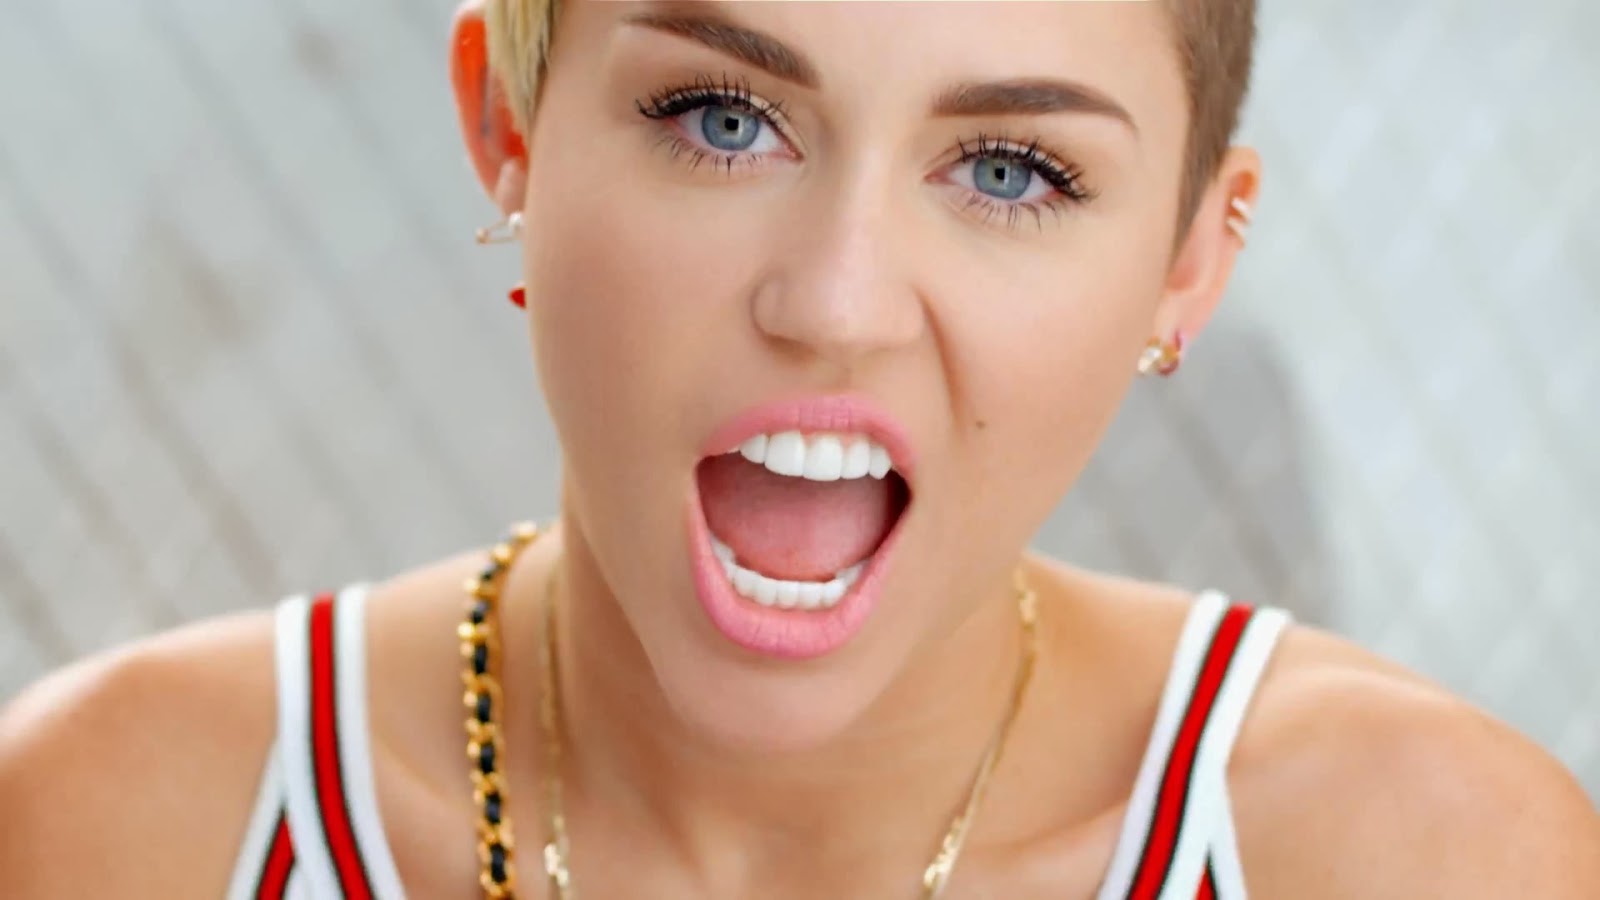 http://www.shechoice.com/miley-cyrus-stuns-in-adore-you-remix-video-cover/